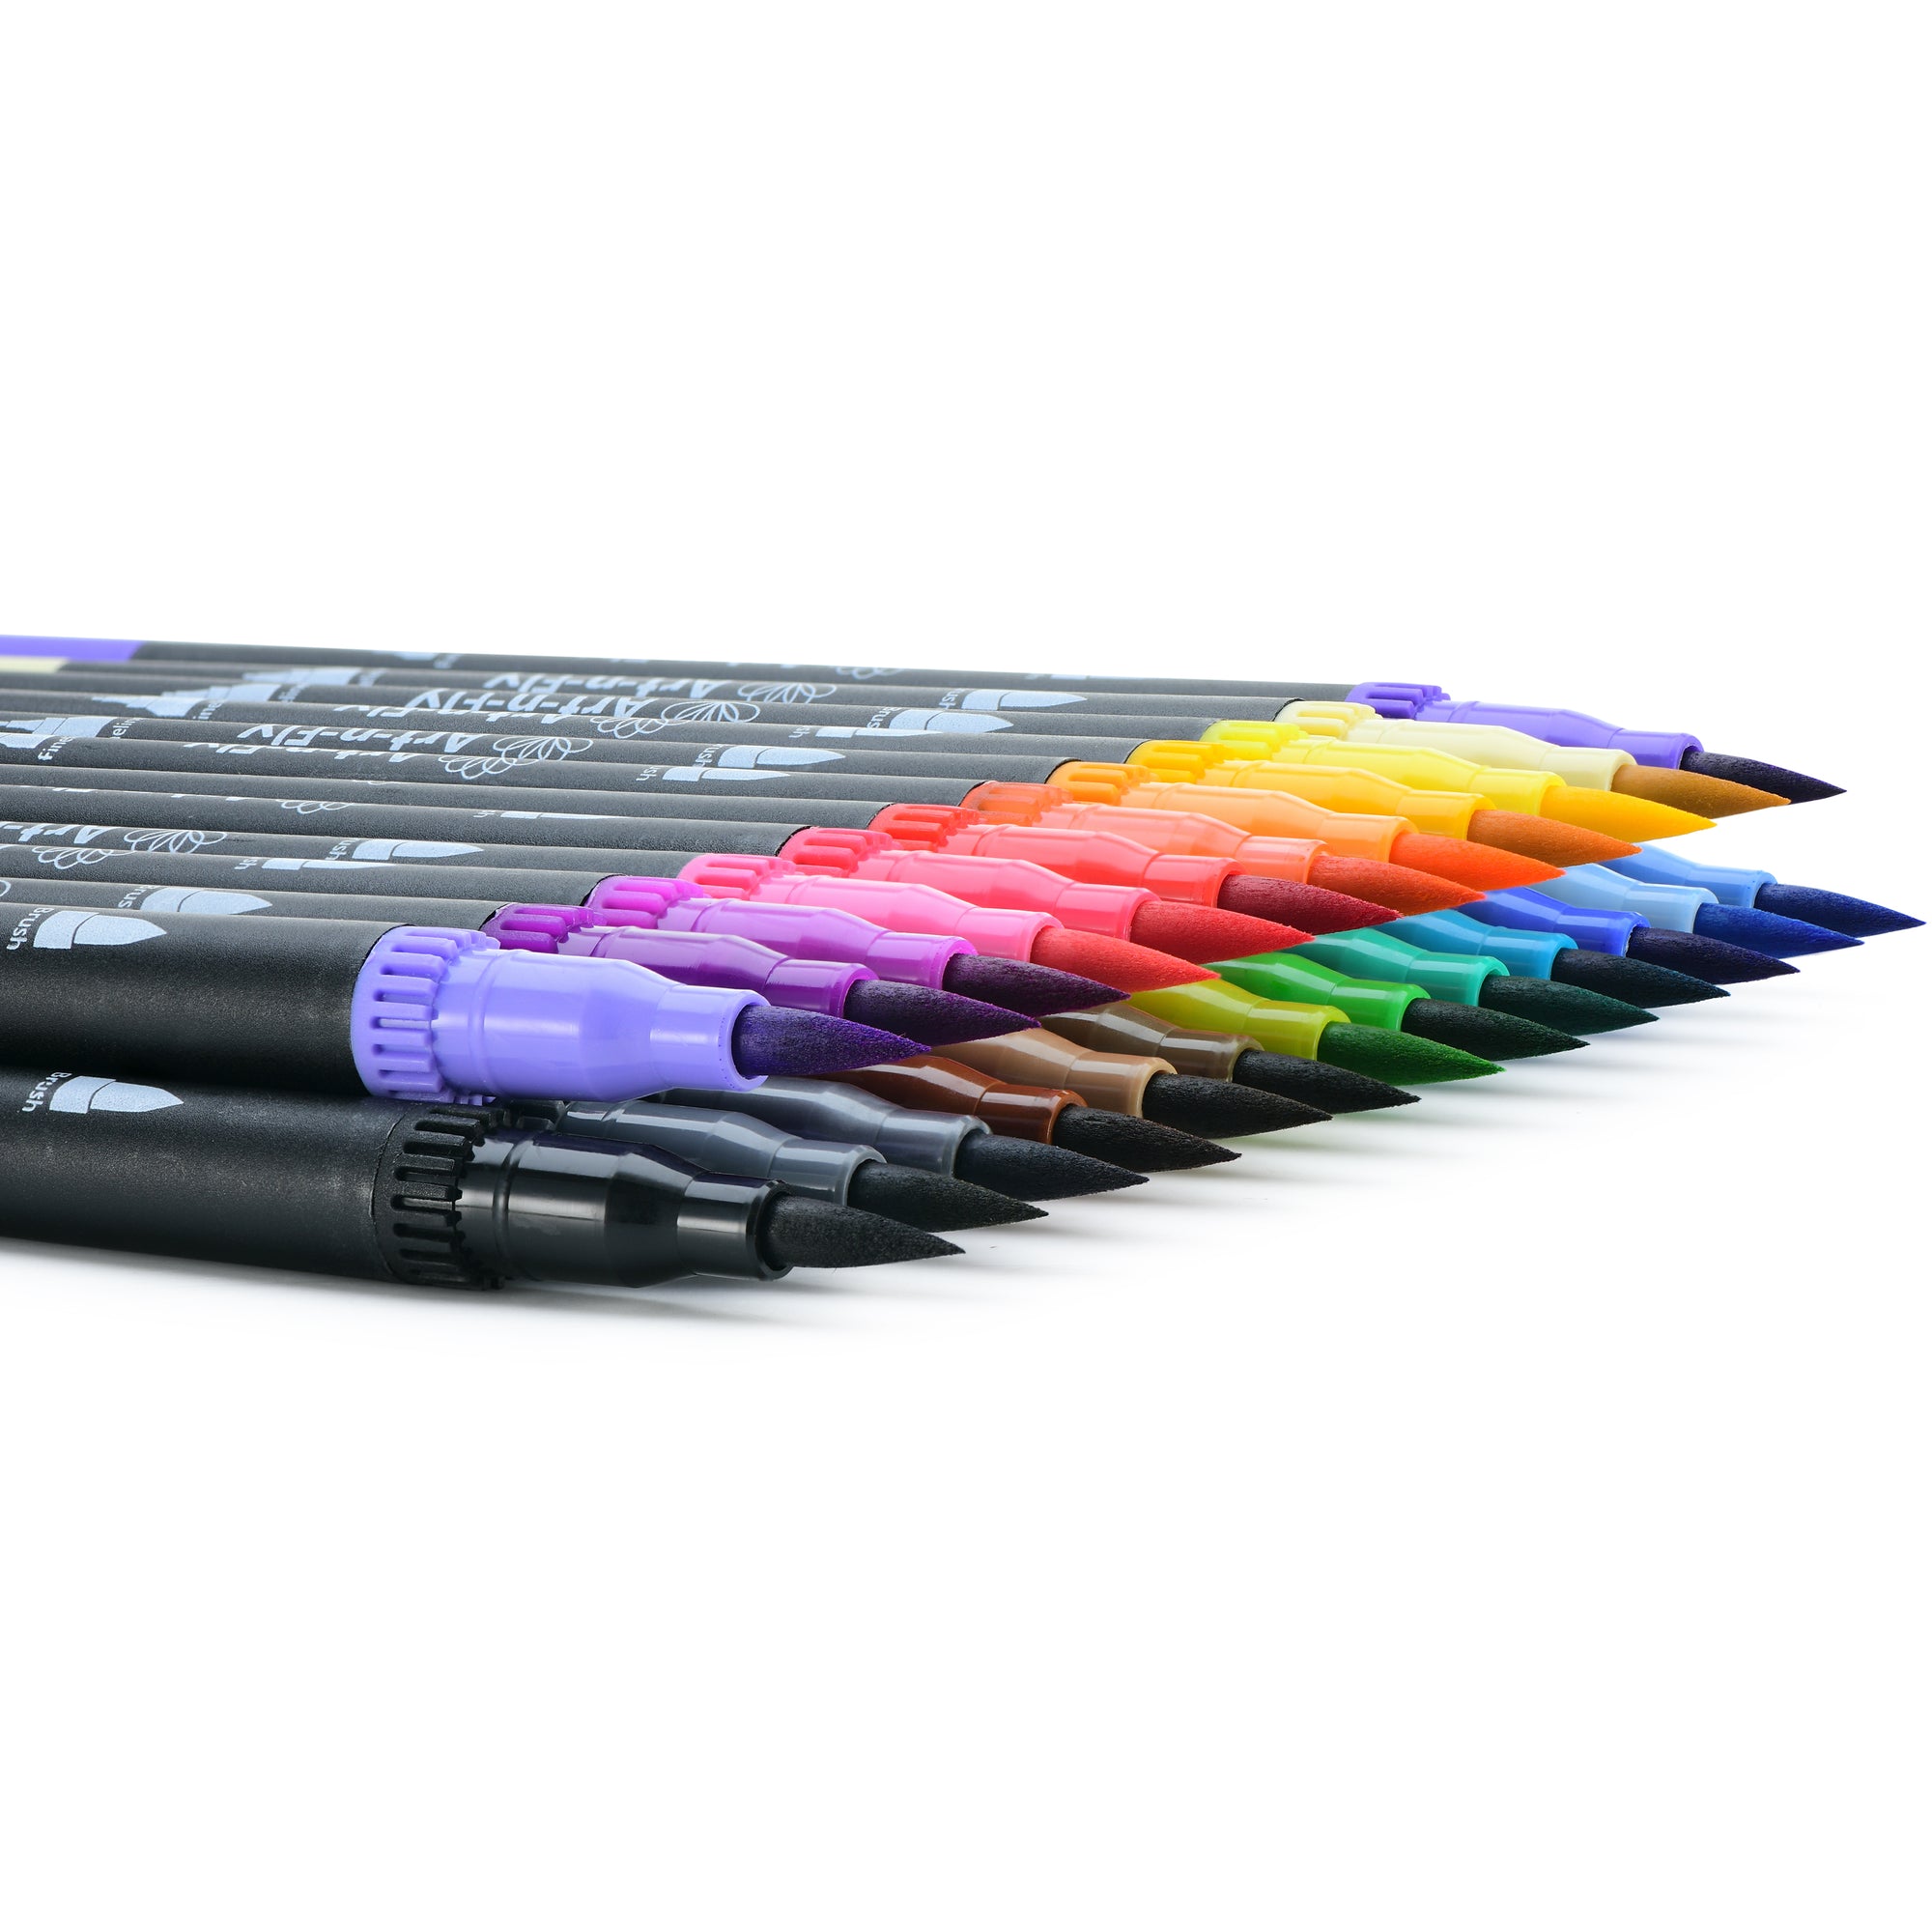 Brush-Sketch Markers Pens For Artists-Coloring Kit Art Markers,Finelin